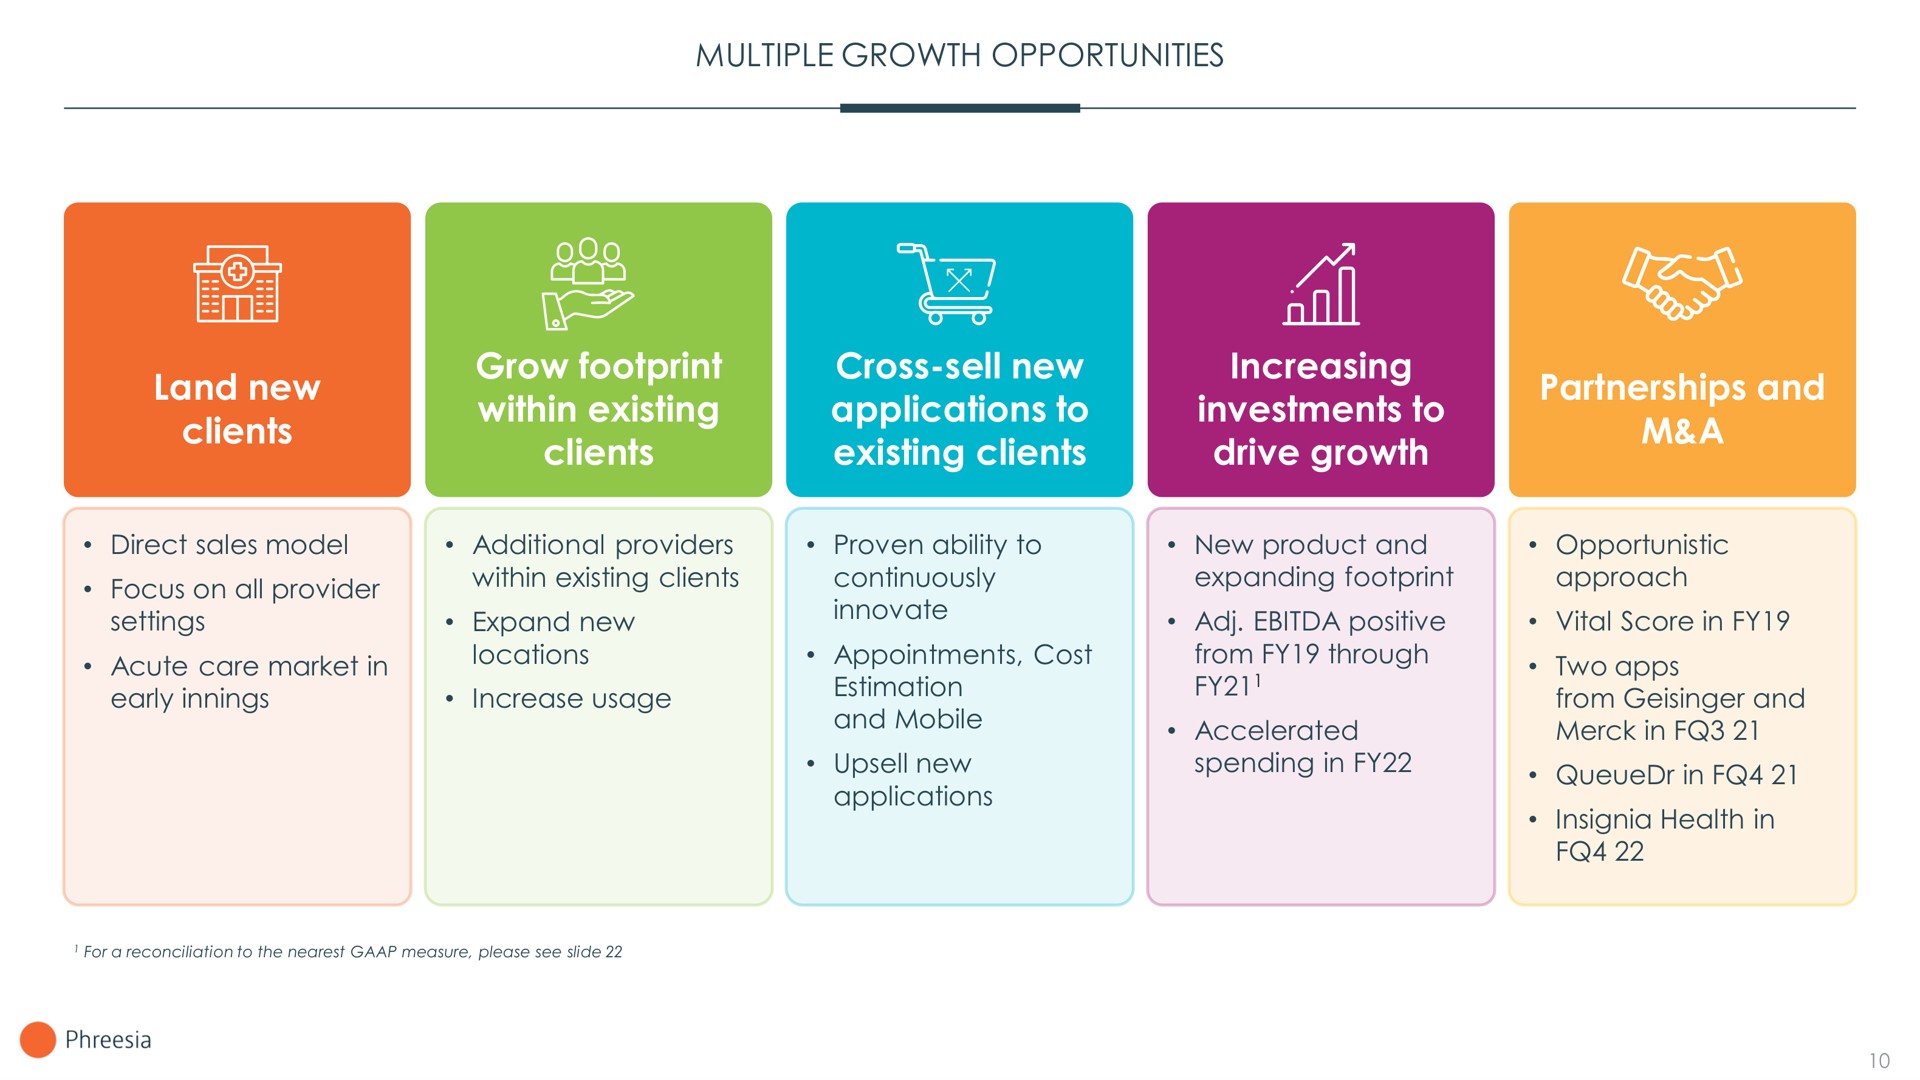 multiple growth opportunities land new clients grow footprint within existing clients cross sell new applications to existing clients increasing investments to drive growth partnerships and a he | Phreesia